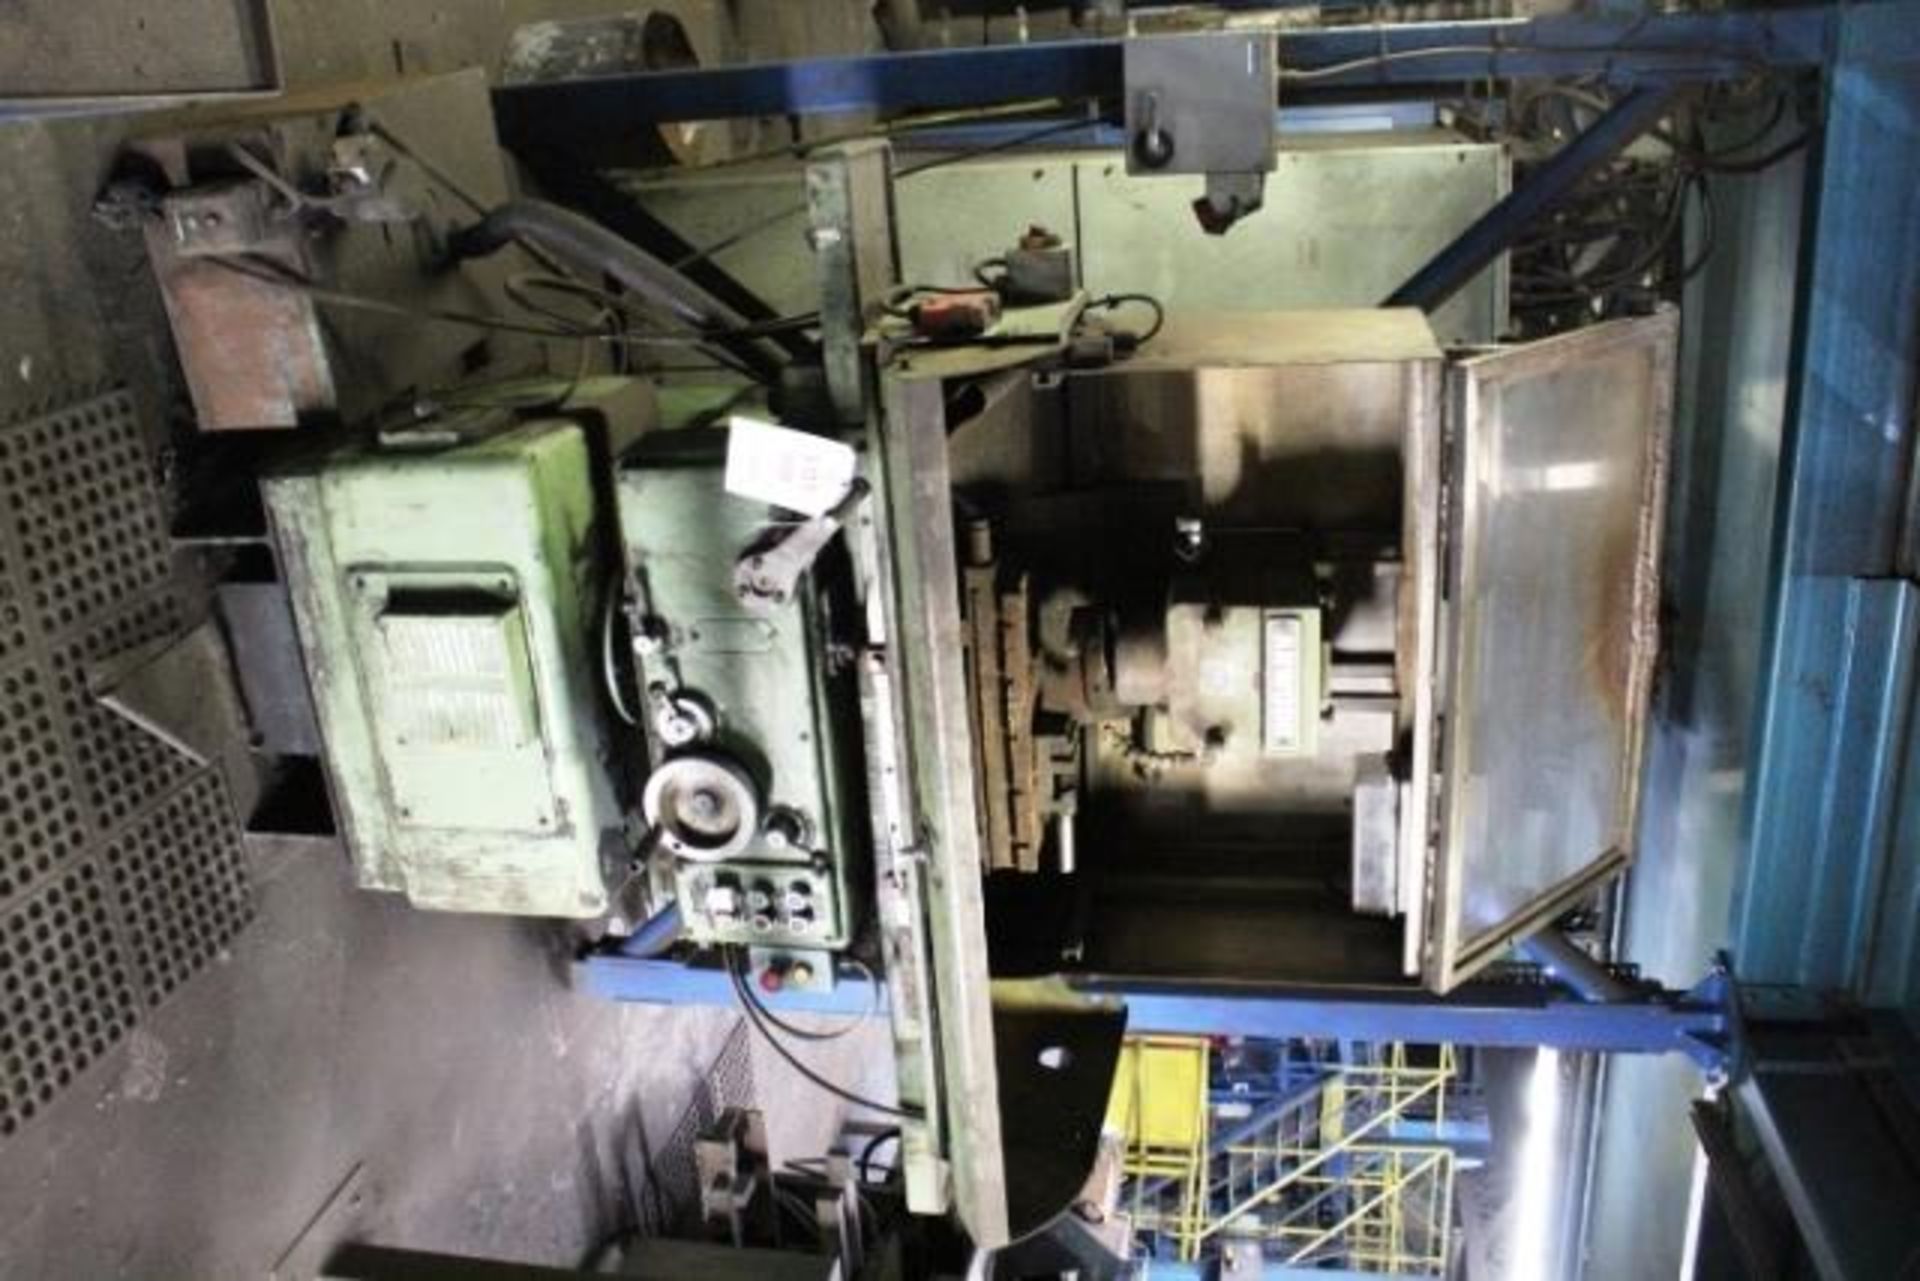 Abwood SG4H vertical spindle surface grinder, serial no. 508AH, 18" table & 3" machine vice (